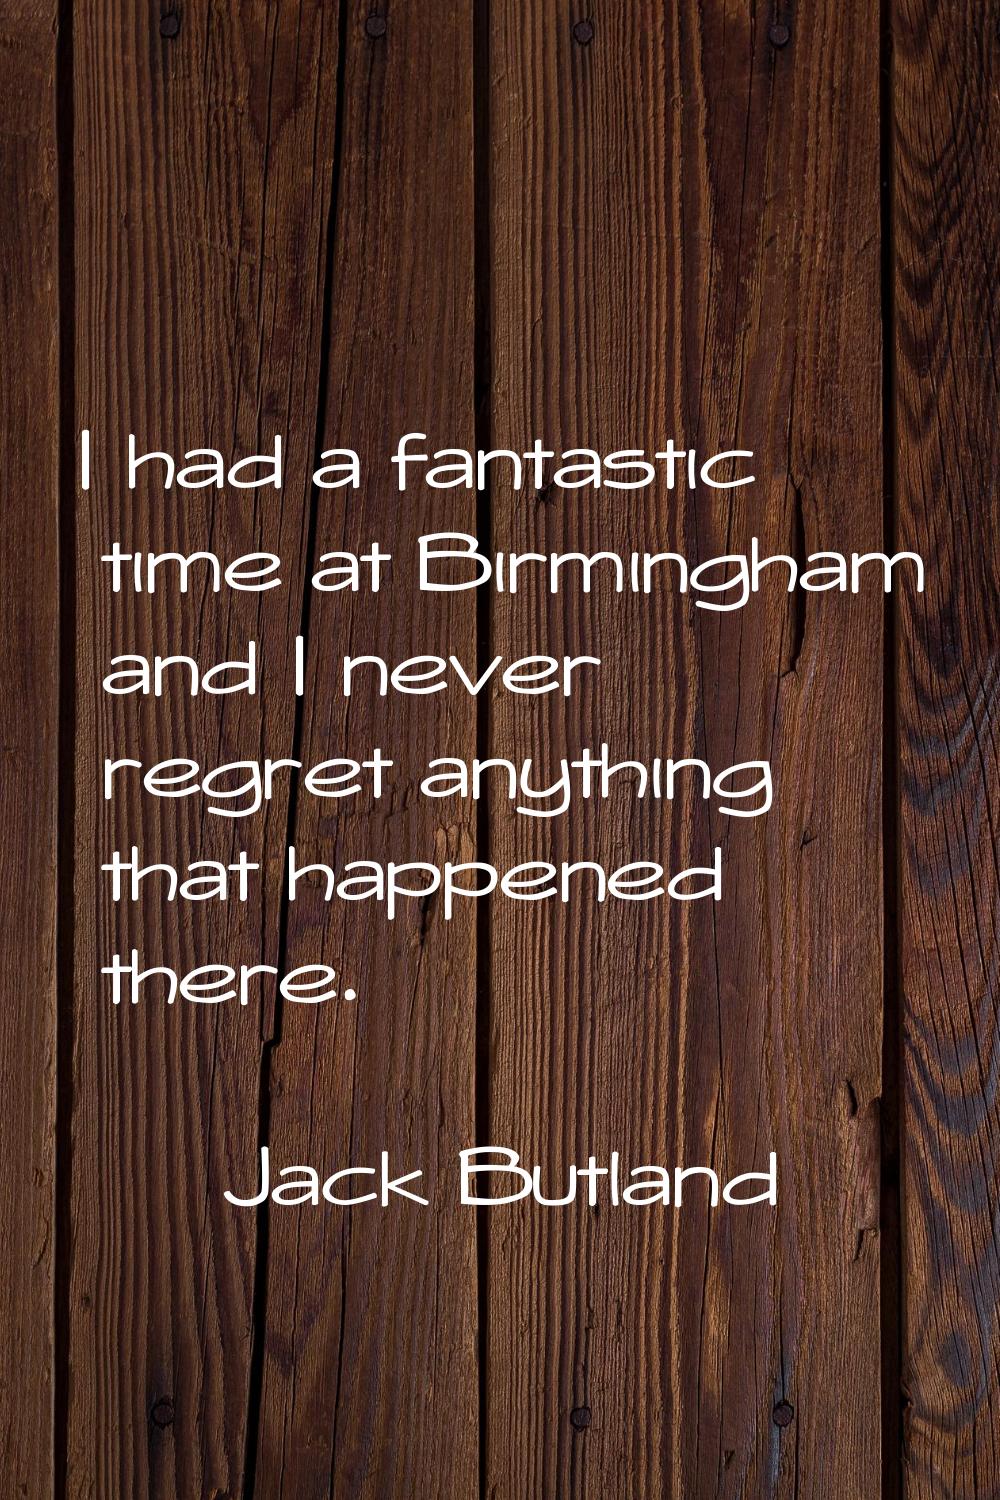 I had a fantastic time at Birmingham and I never regret anything that happened there.